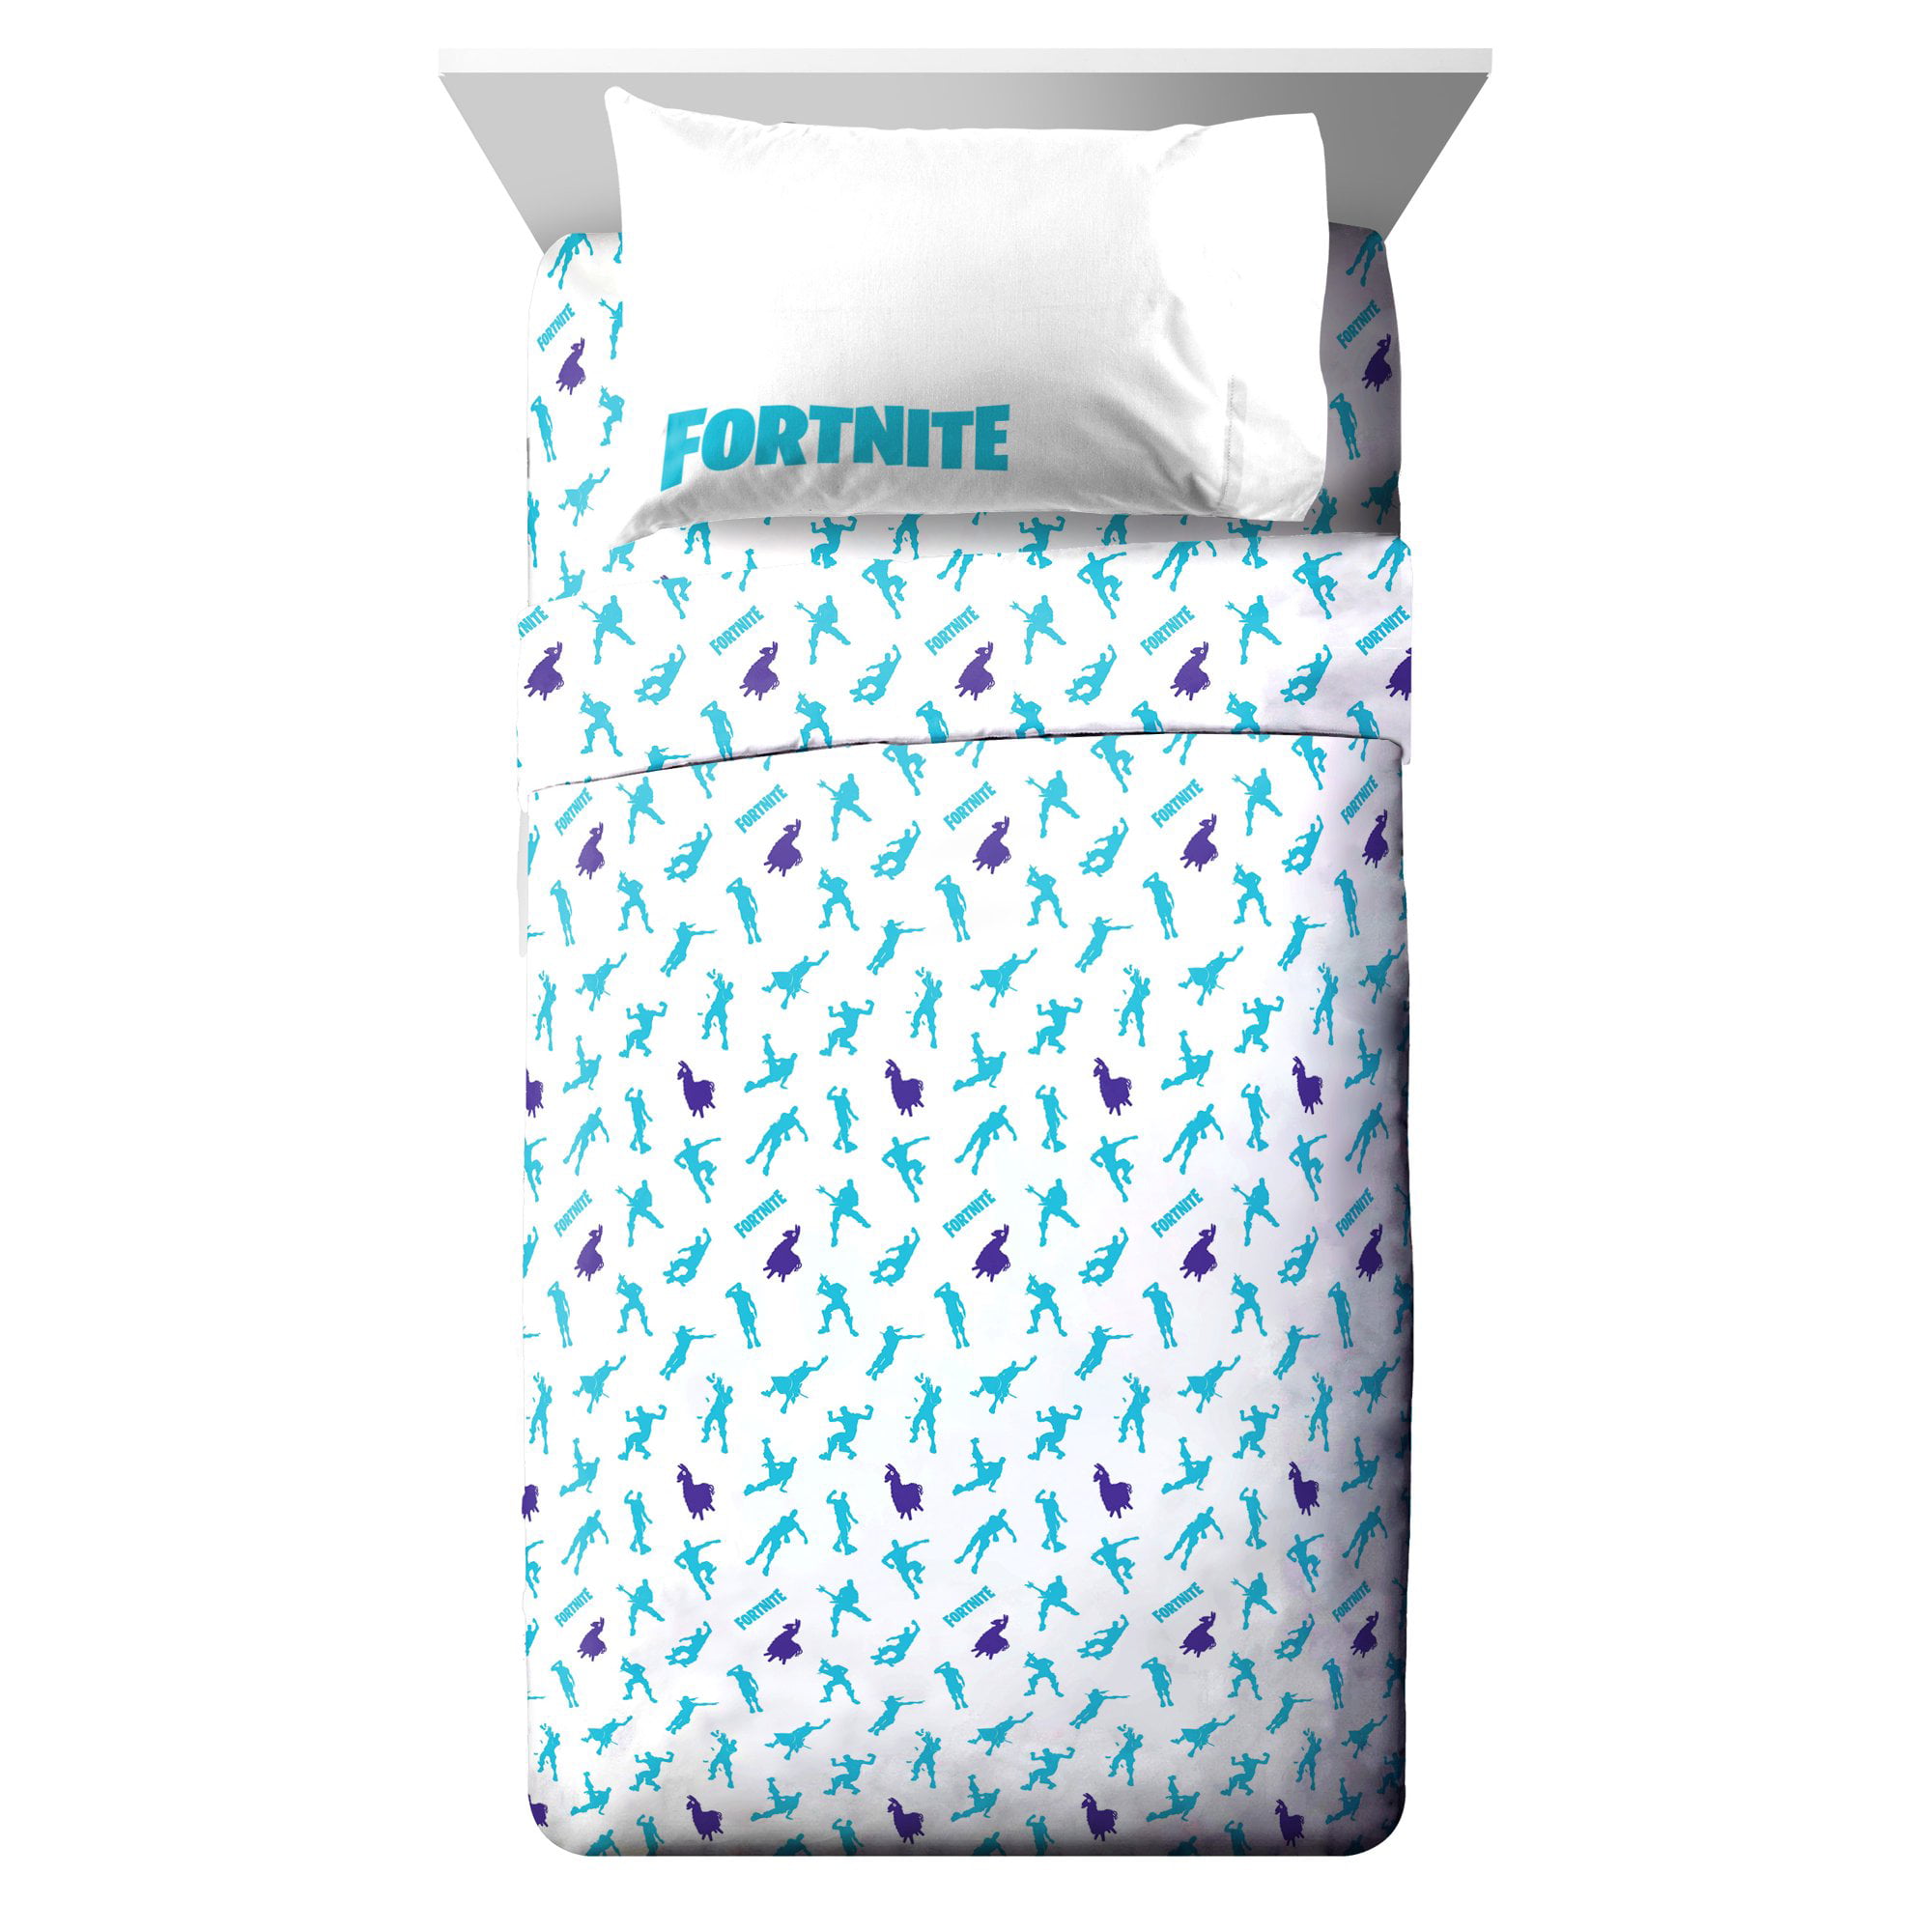 Fortnite Boogie Boys 5 Piece Bedding Set Twin or Full Comforter Sheets 2DayShip 